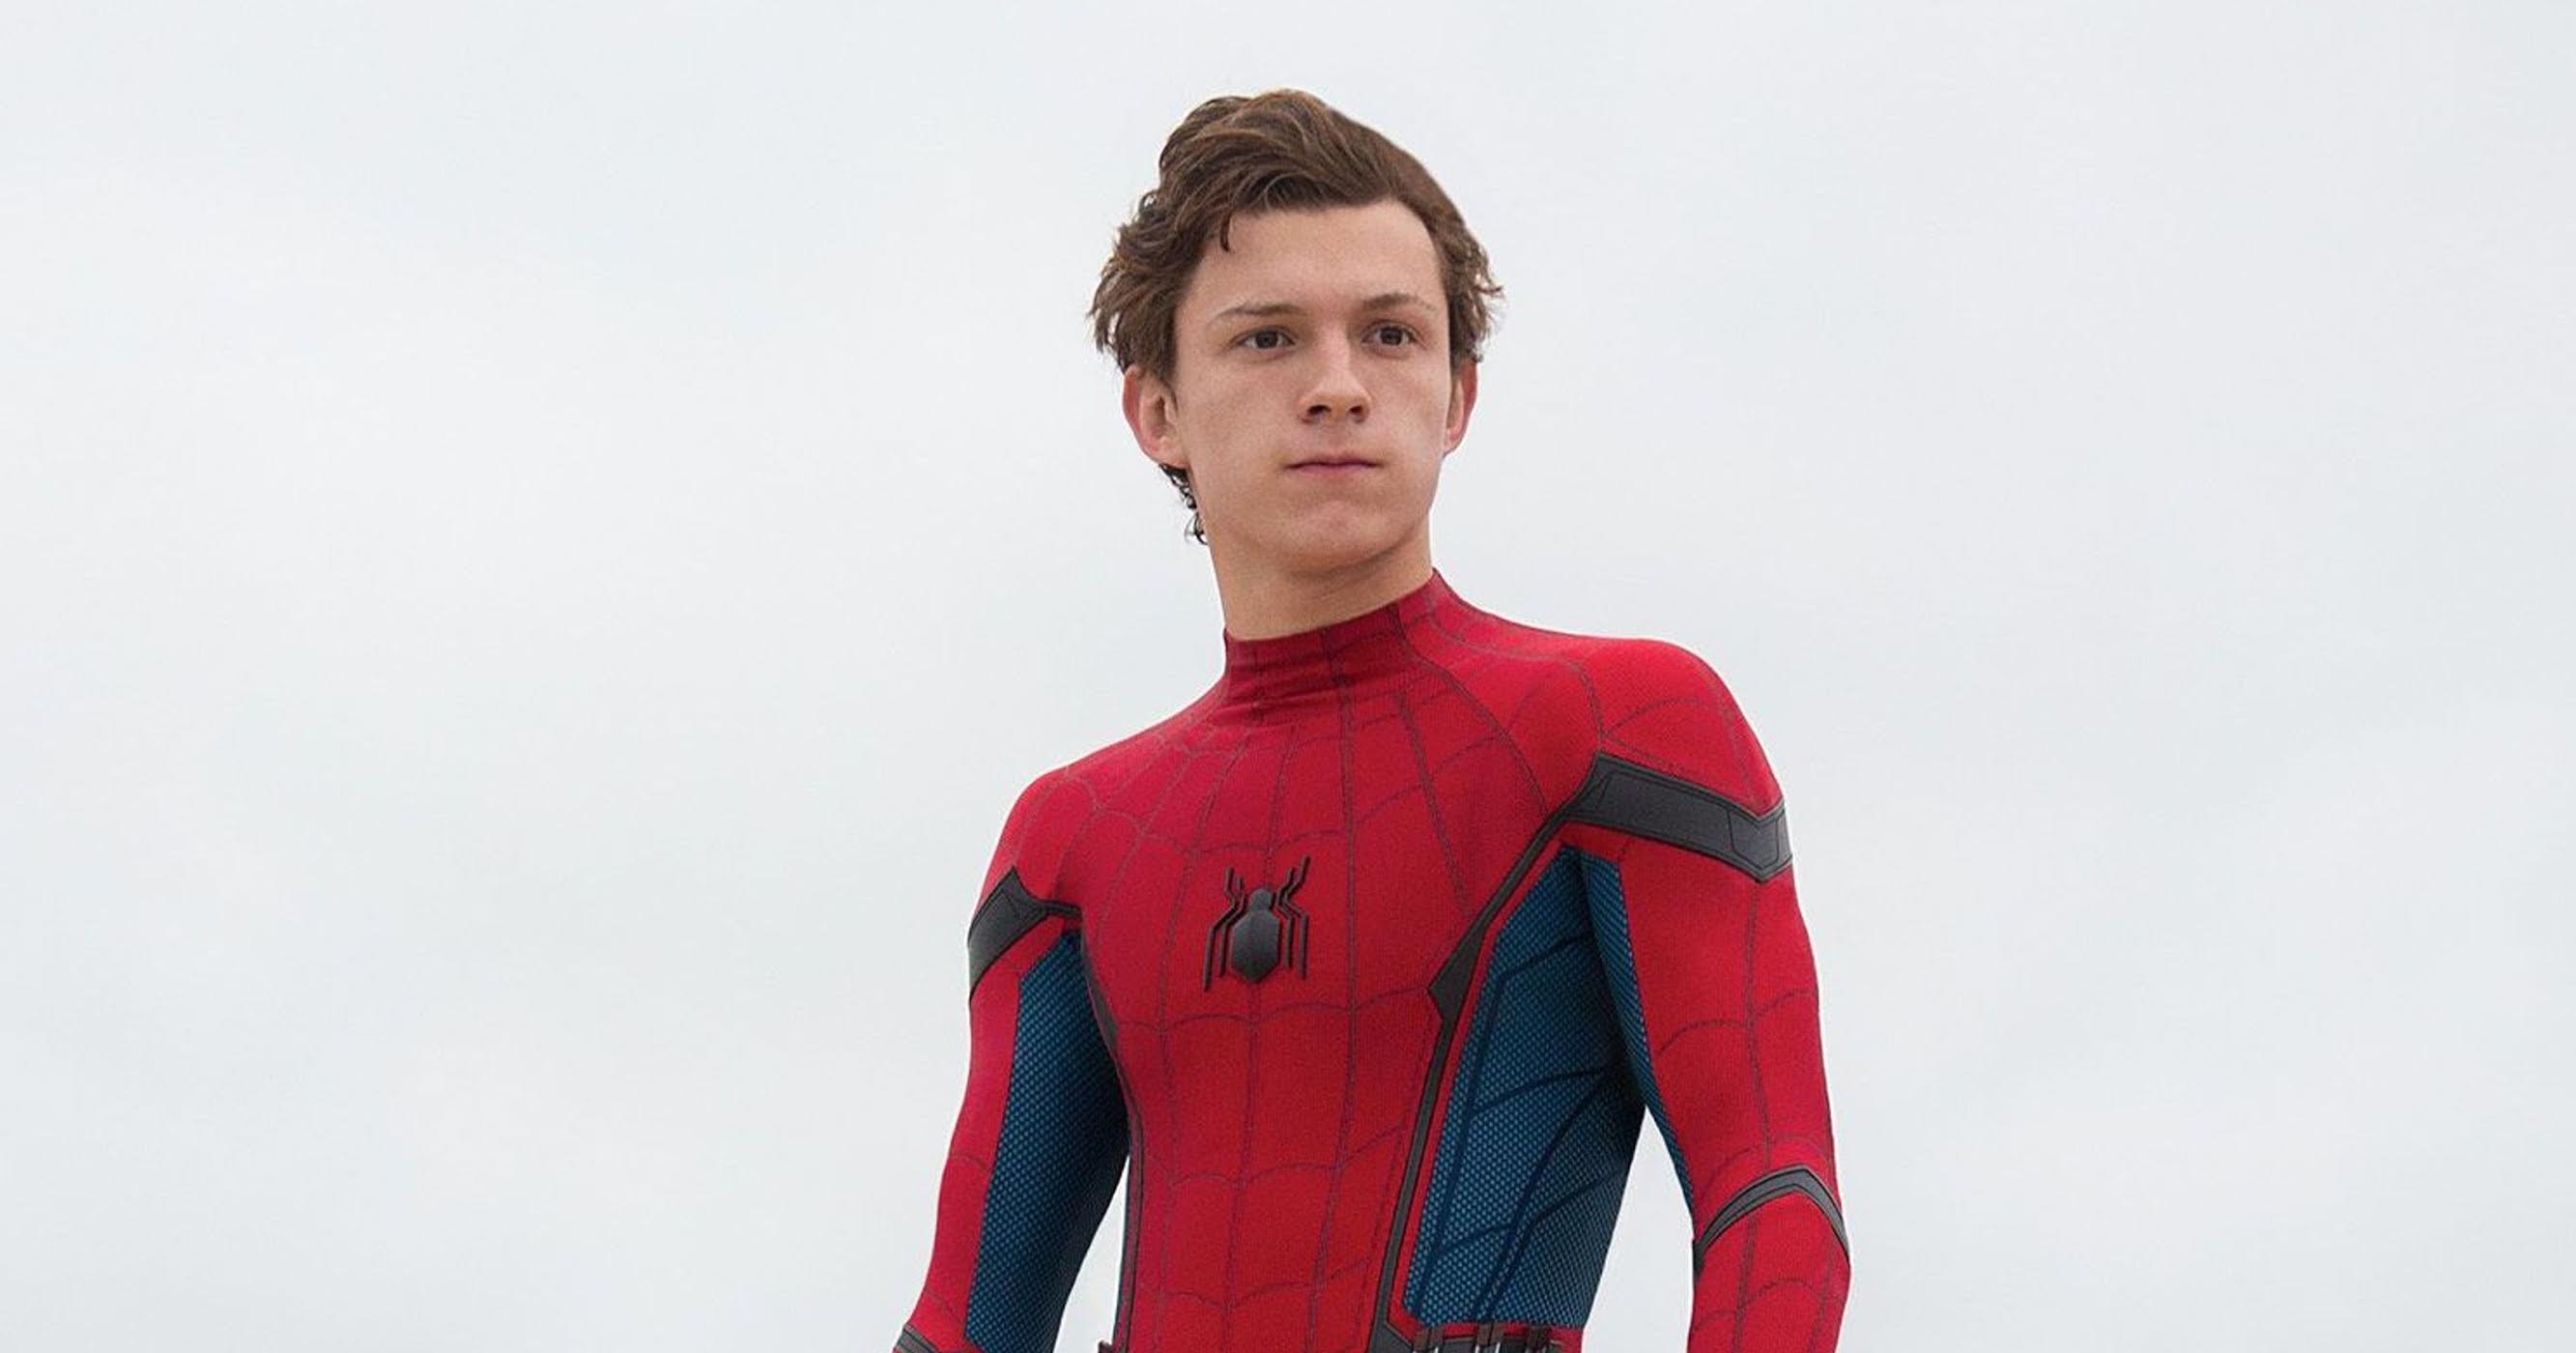 Tom Holland Comes to the Rescue of a Young Fan in Trouble During Autograph Signing